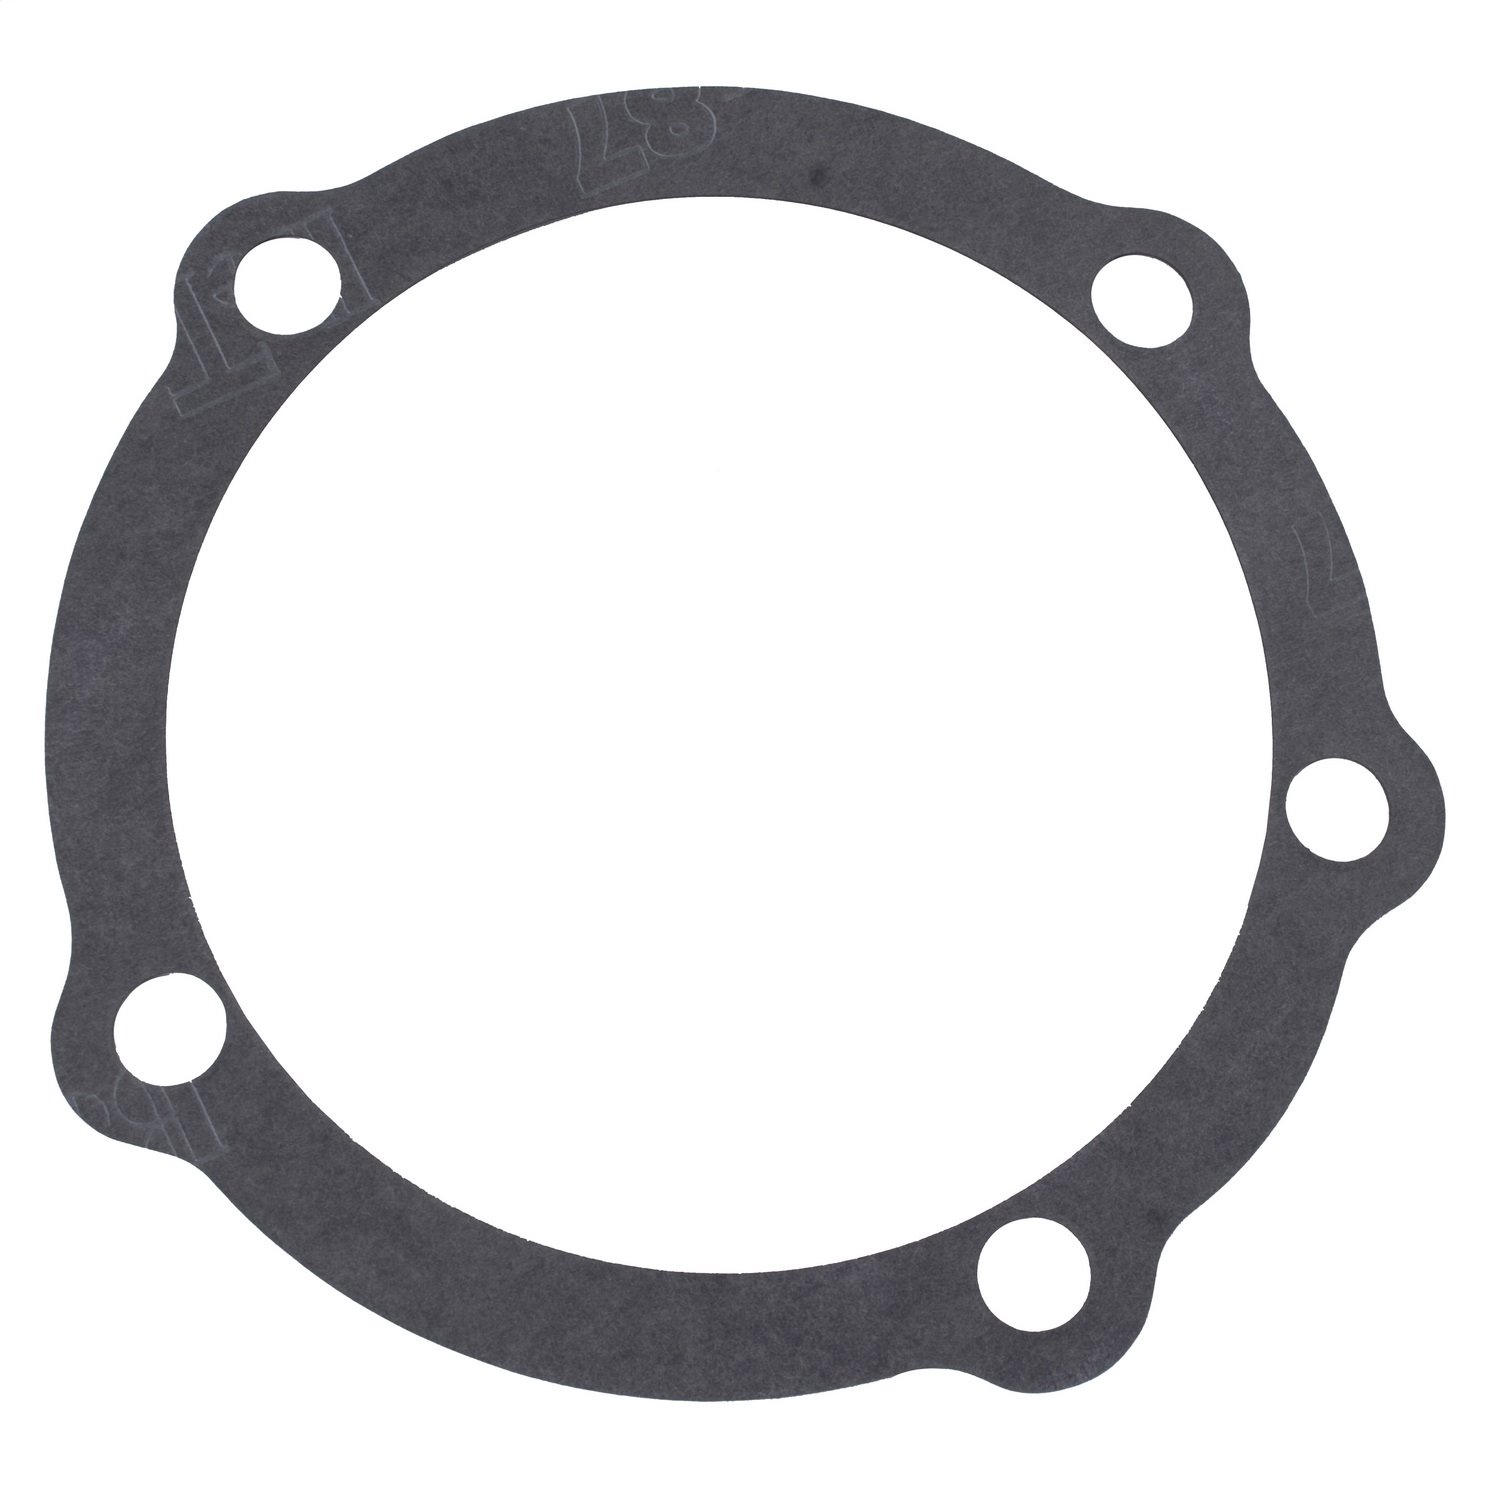 This five-hole rear PTO cover gasket from Omix-ADA for the Dana 18 and Dana 20 transfer cases found